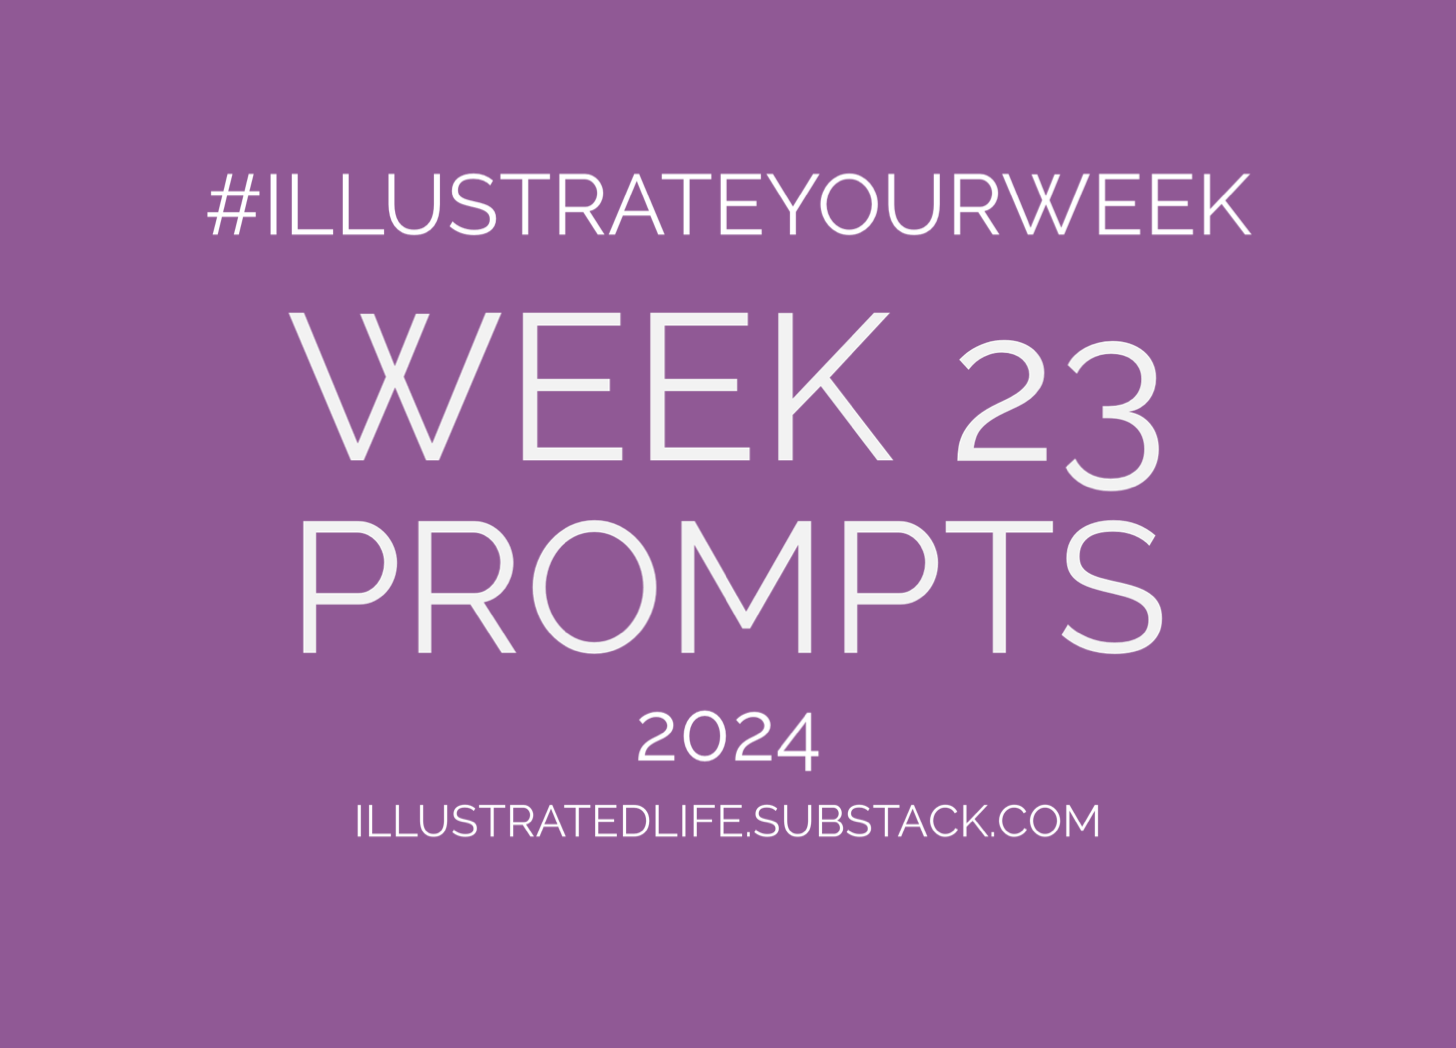 Week 23 Prompts for Illustrate Your Week 2024